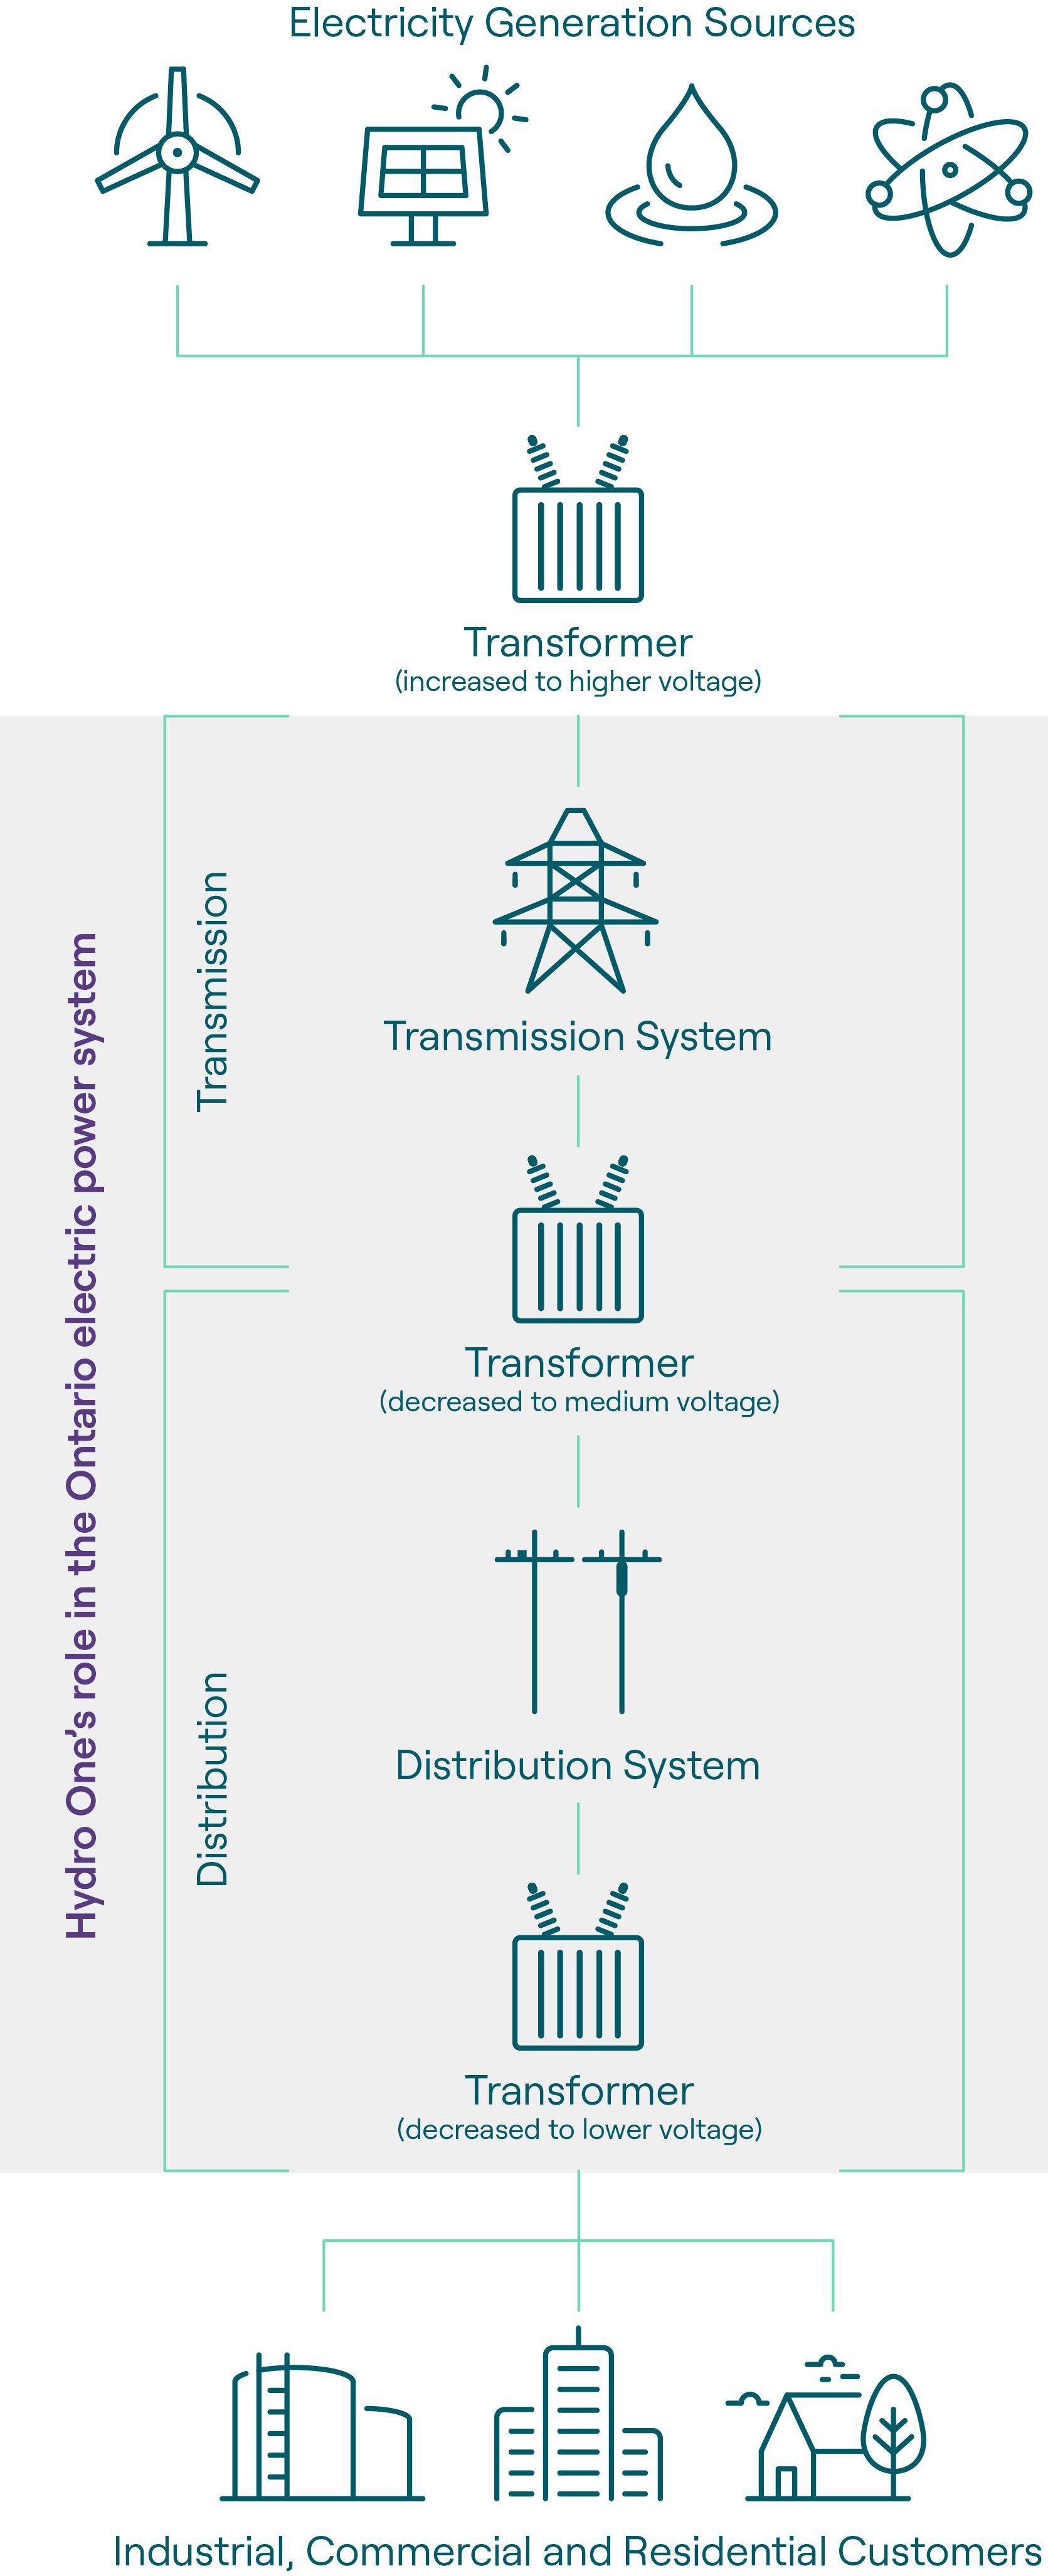 infographic of our role in the electricity system, taking large amounts of power from generating stations to our transformer stations, then to distribution stations, and through power lines to pole-top or pad-mounted transformers to the meter on your home or business